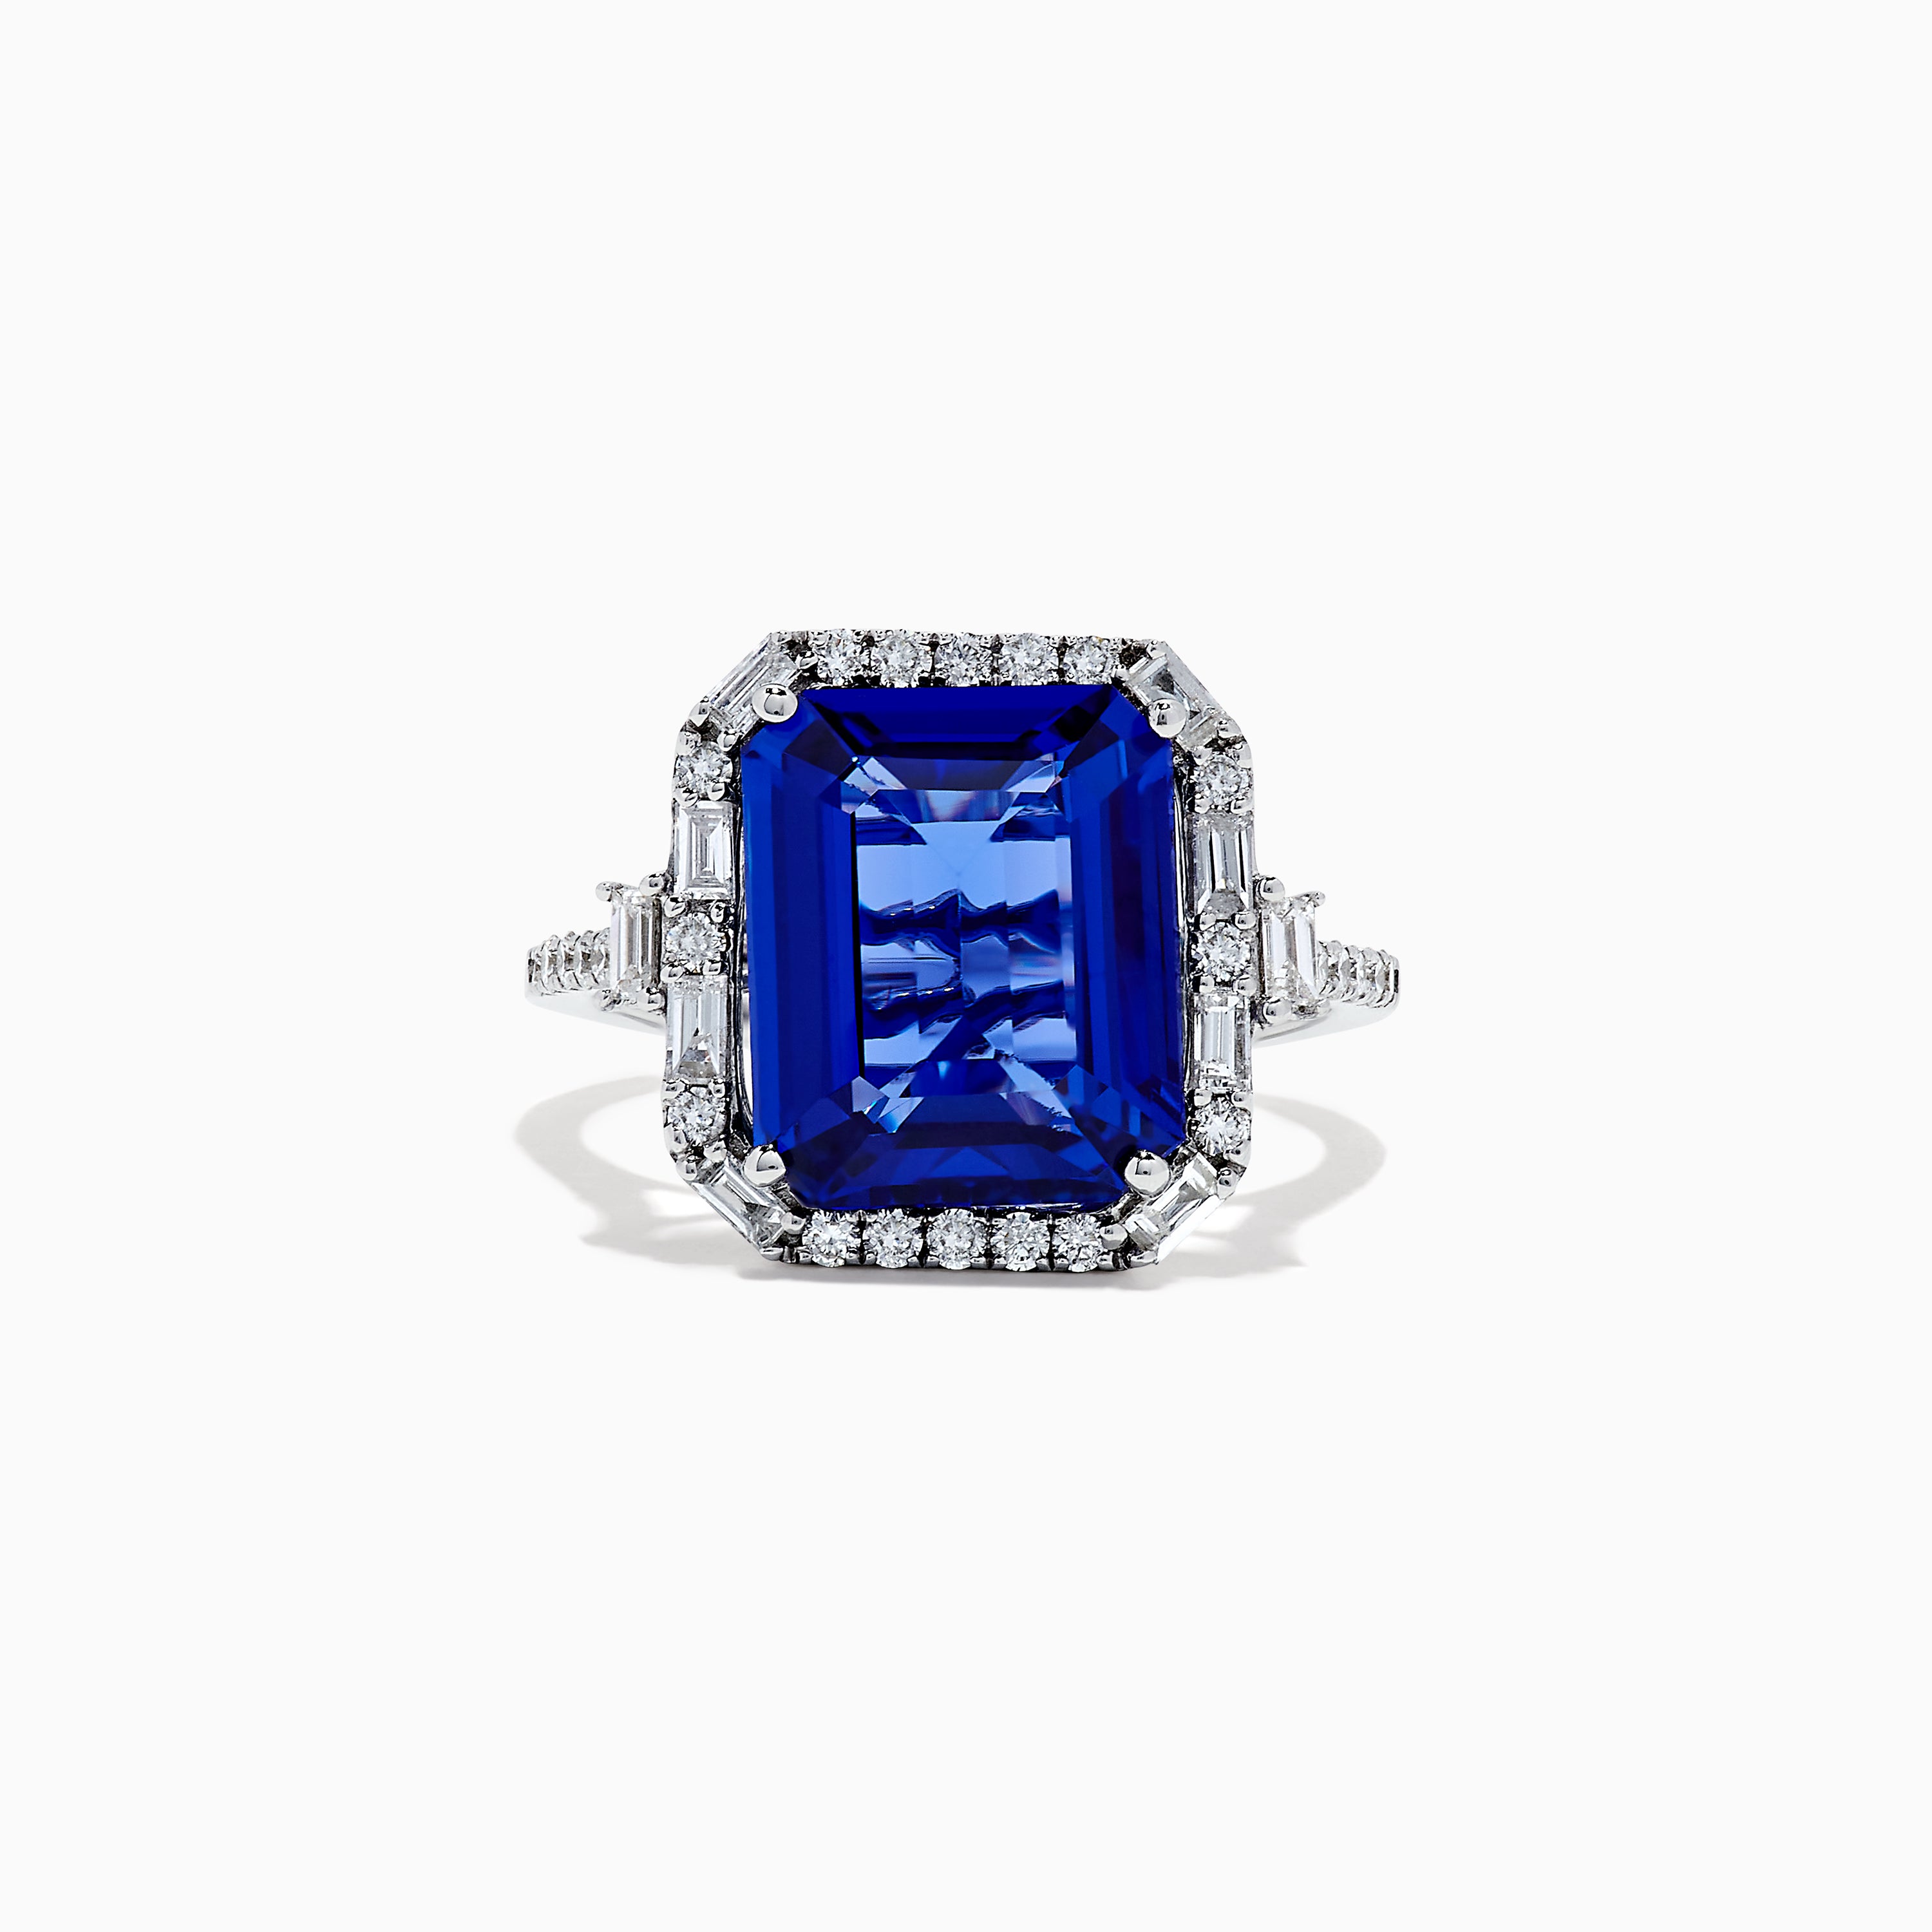 Effy Limited Edition 14K White Gold Tanzanite and Diamond Cocktail Ring